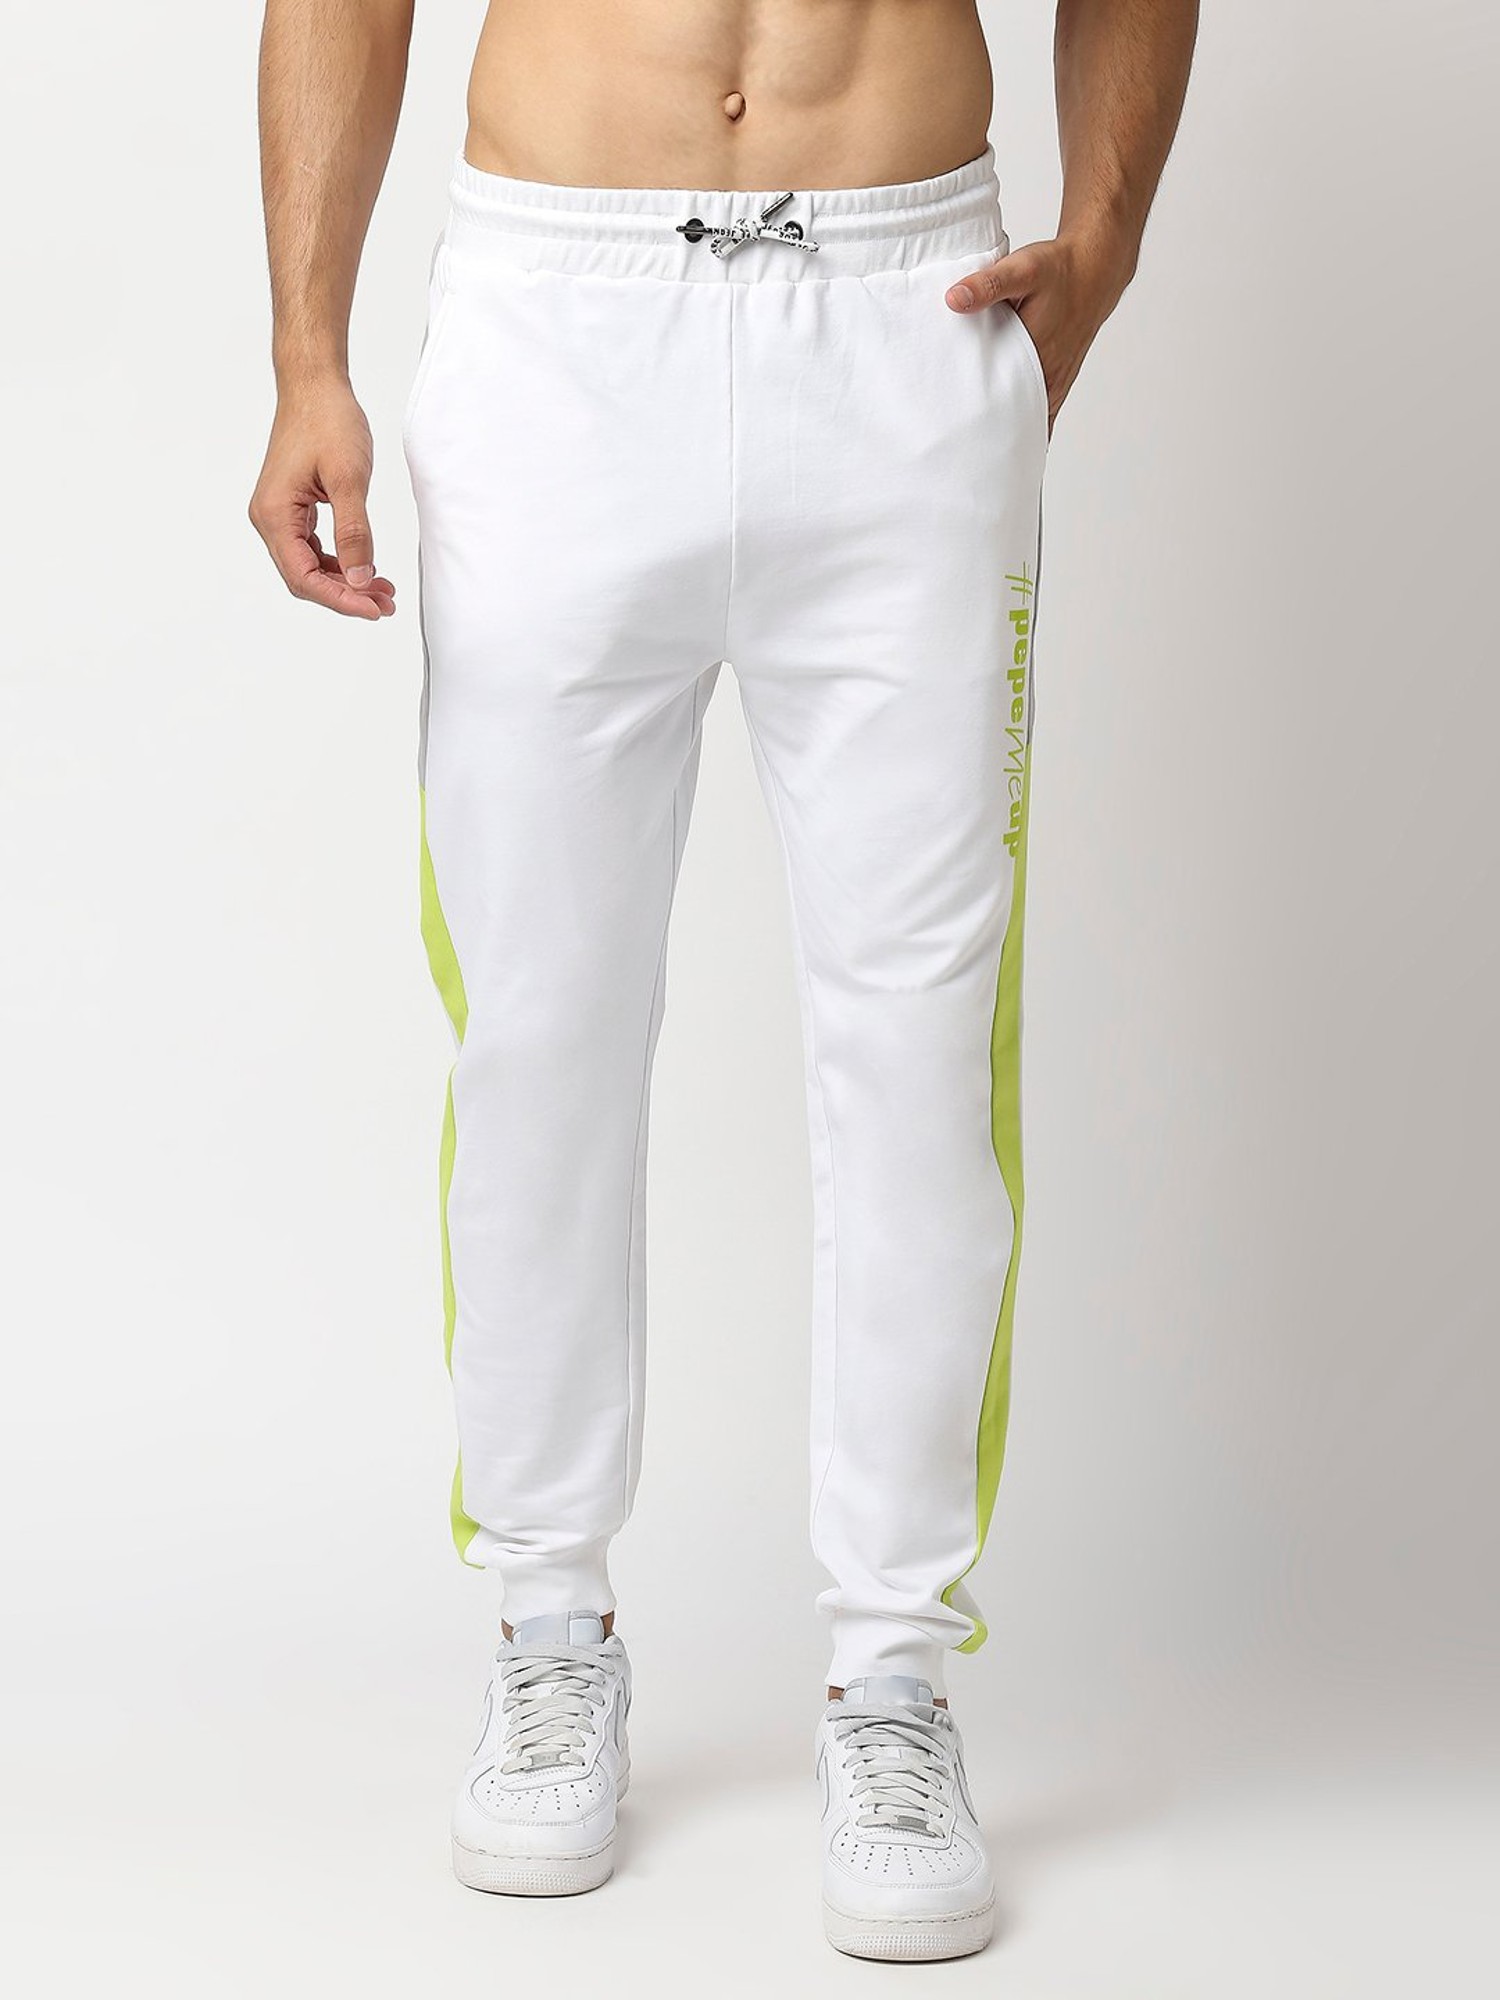 2 Tone Yellow and Blue Unisex track pants – The Fiend's Emporium